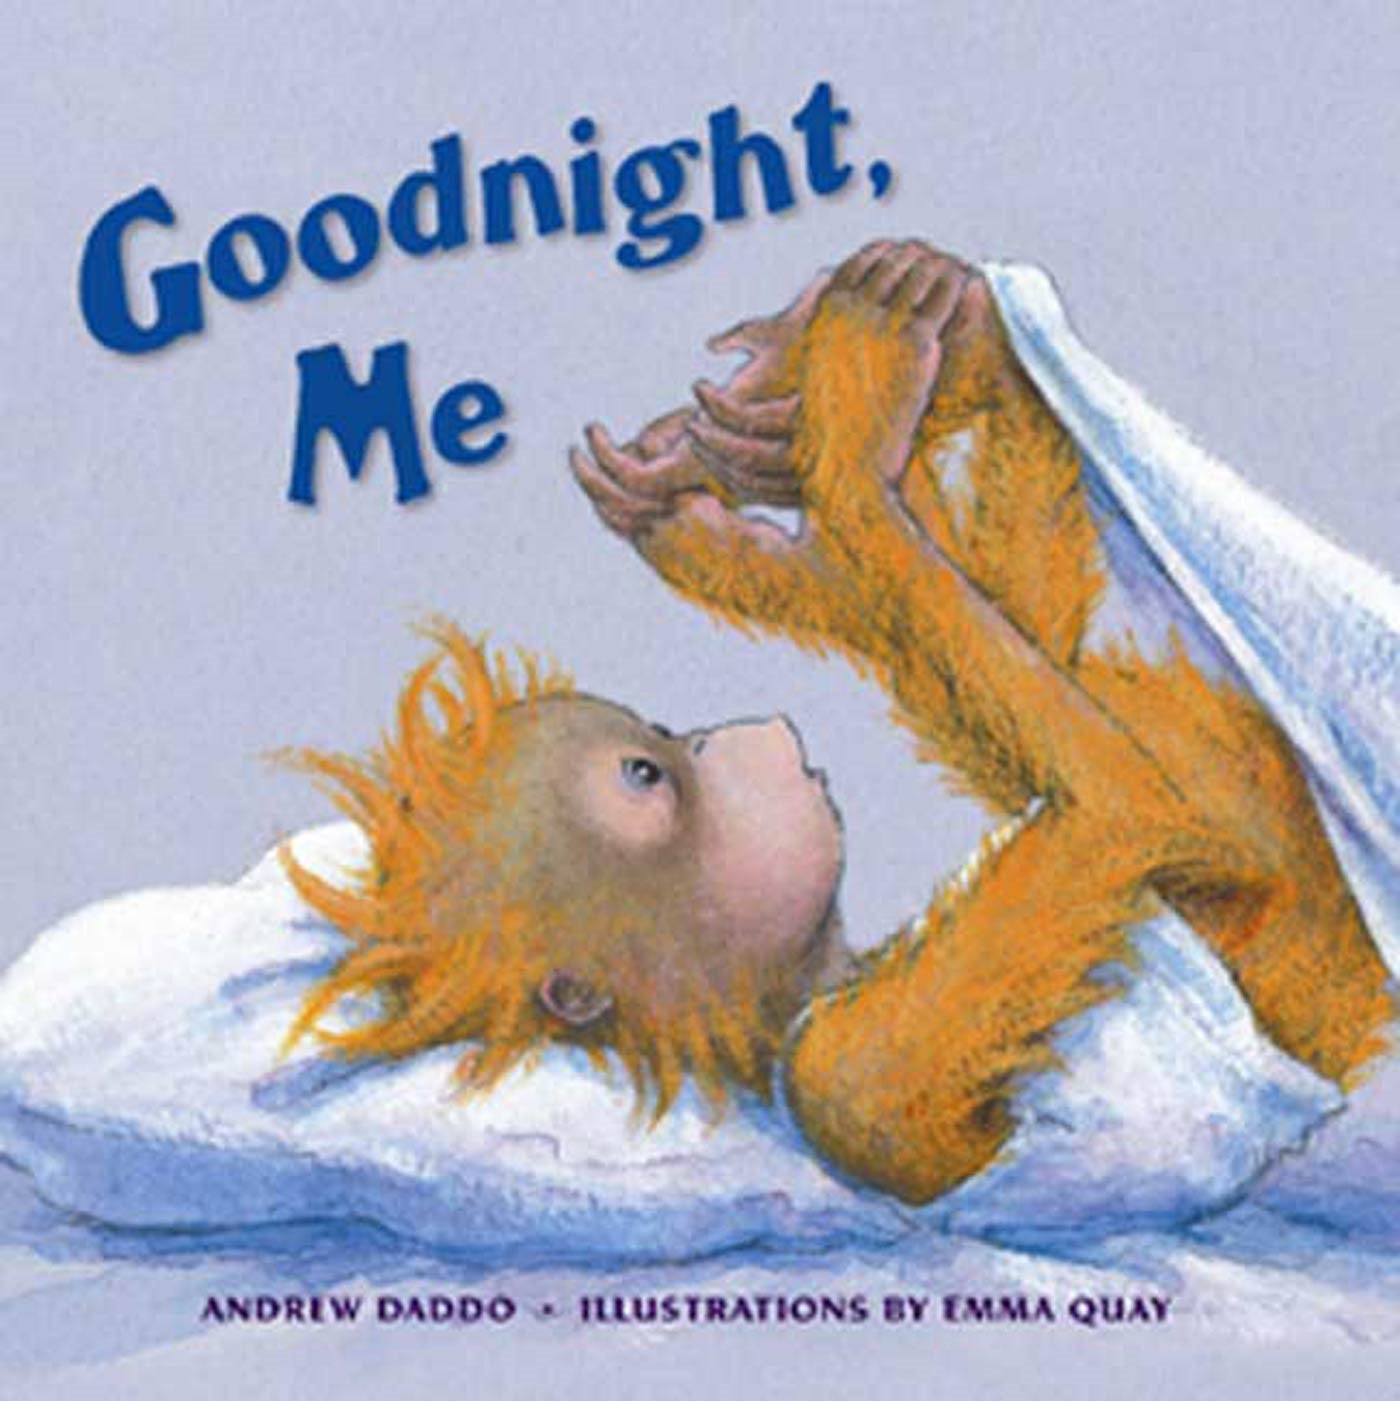 Goodnight, Me by Andrew Daddo